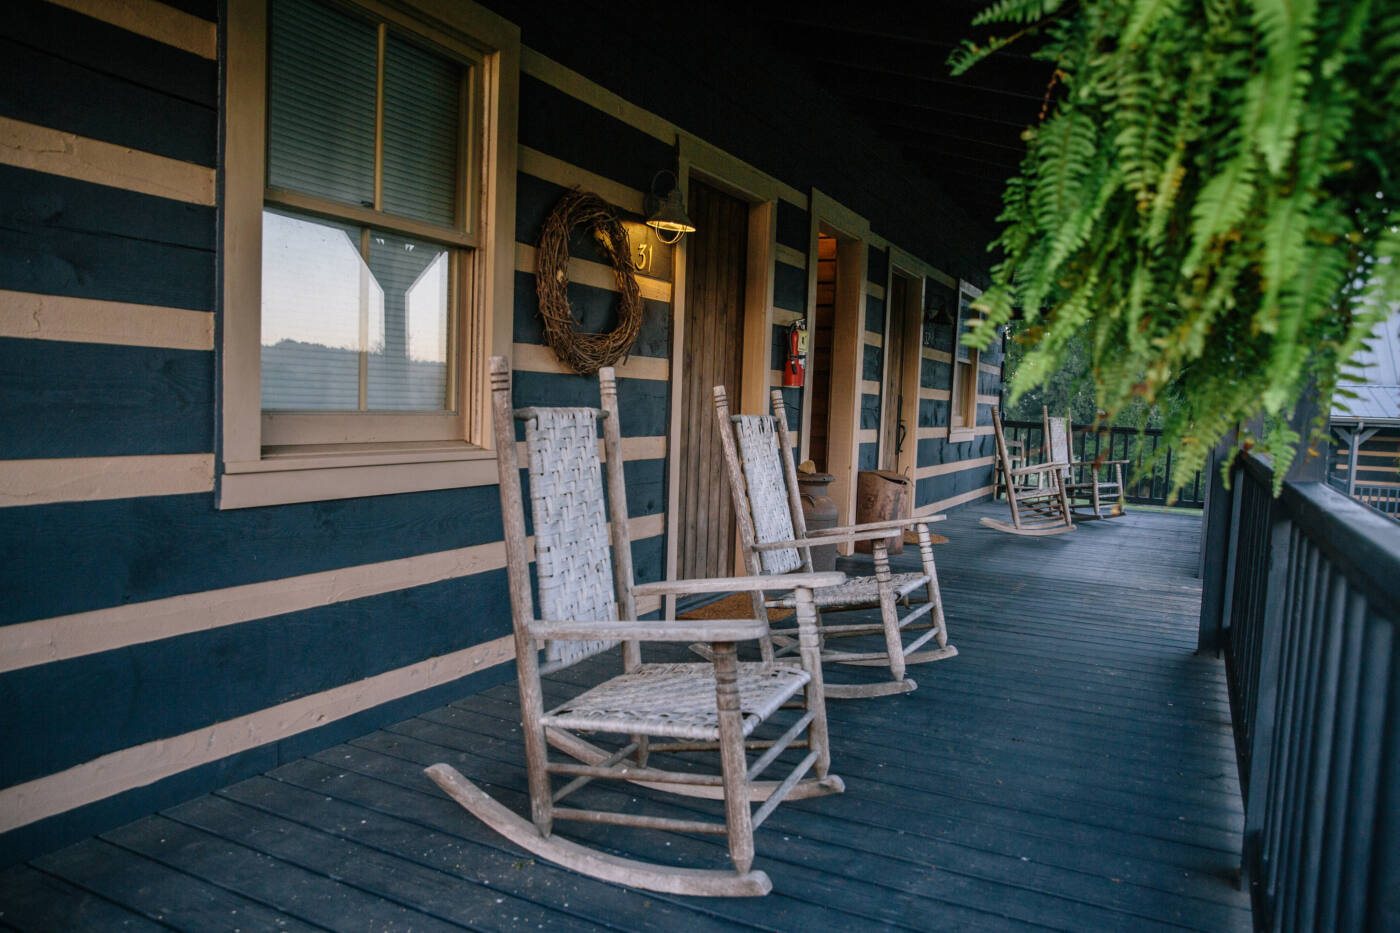 Four rocking chairs on a wooden porch